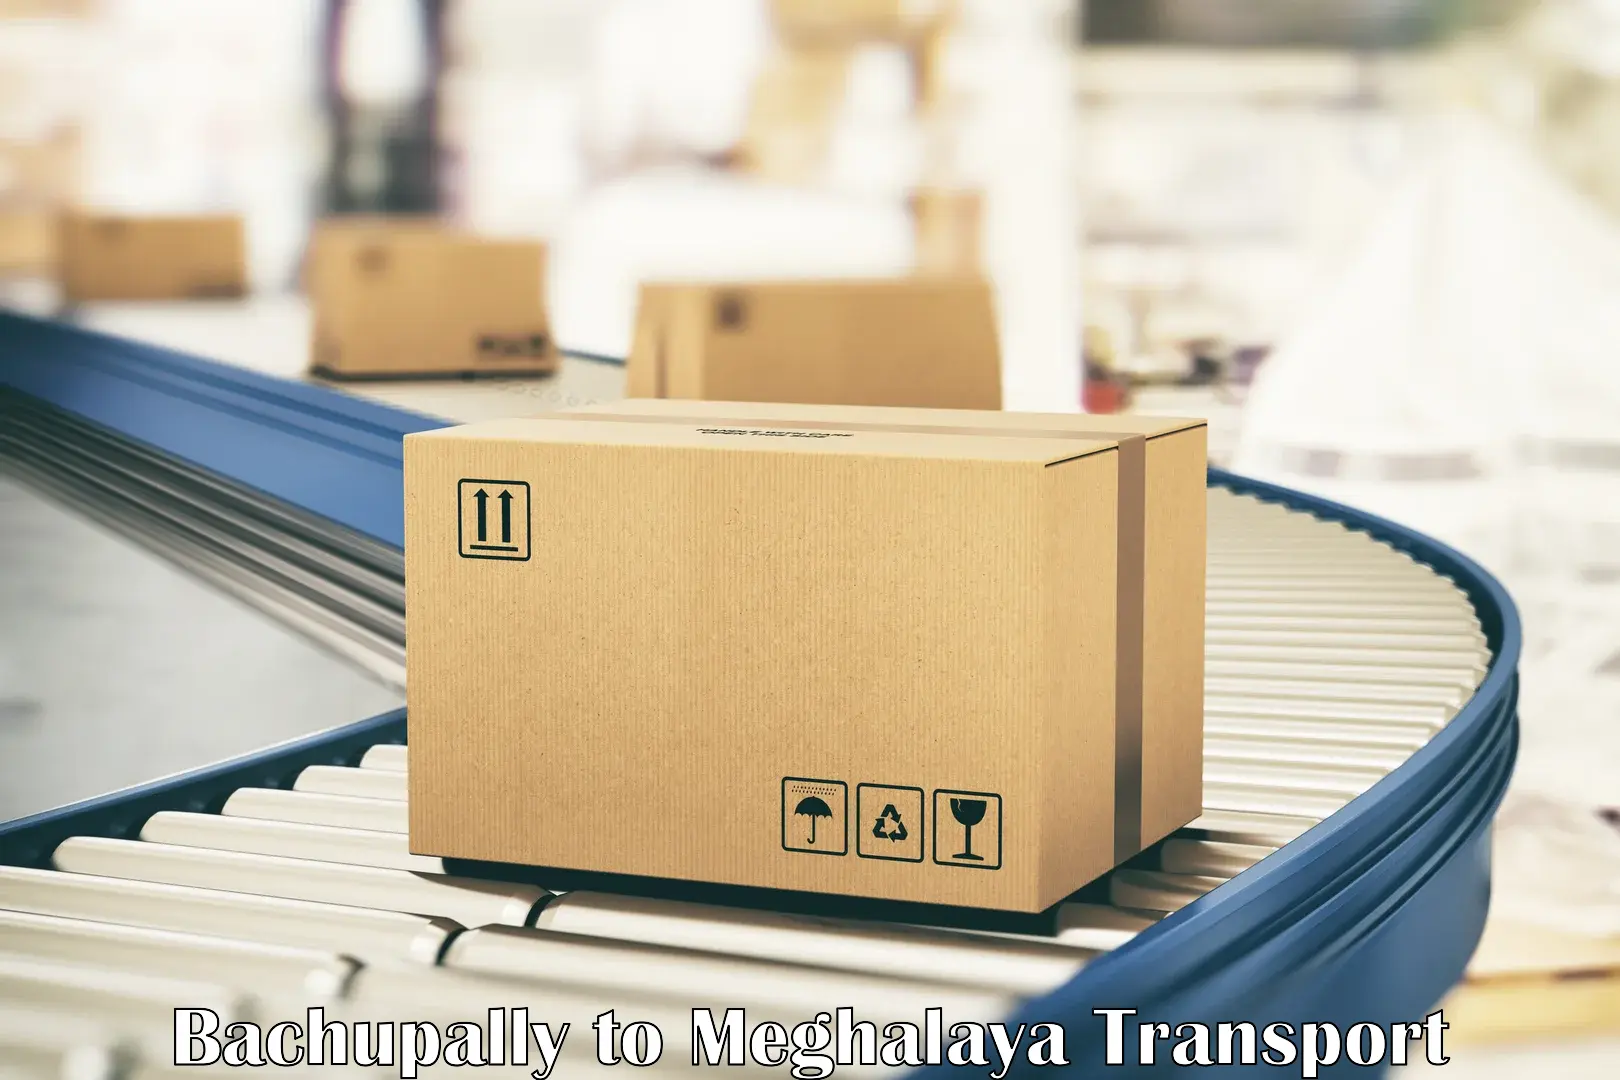 Air freight transport services in Bachupally to Shillong